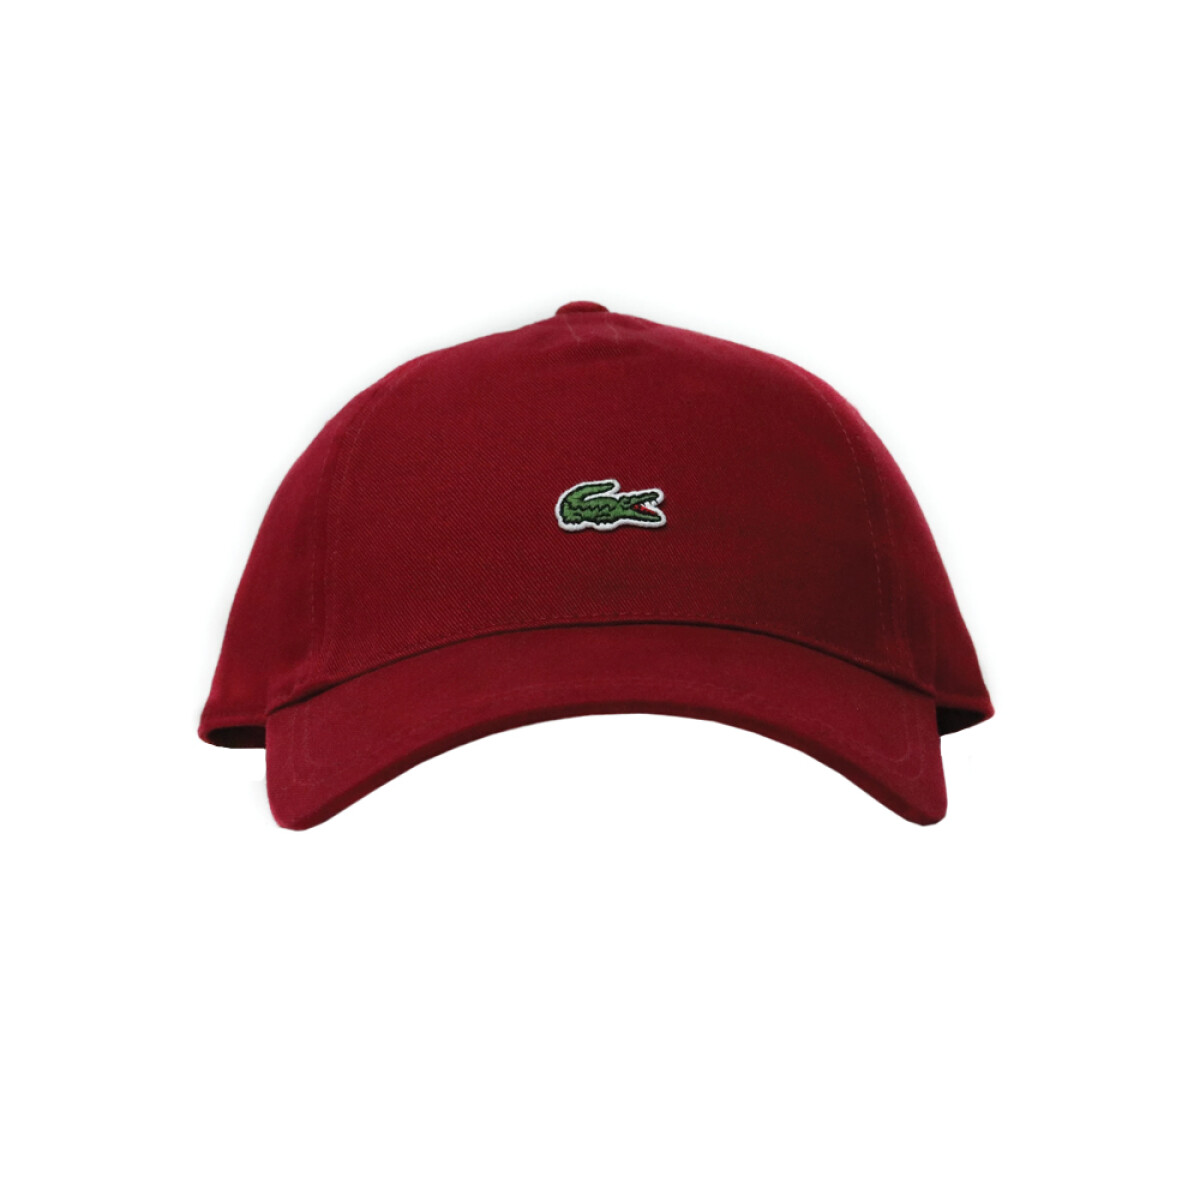 CAPS AND HATS BOR - Red 